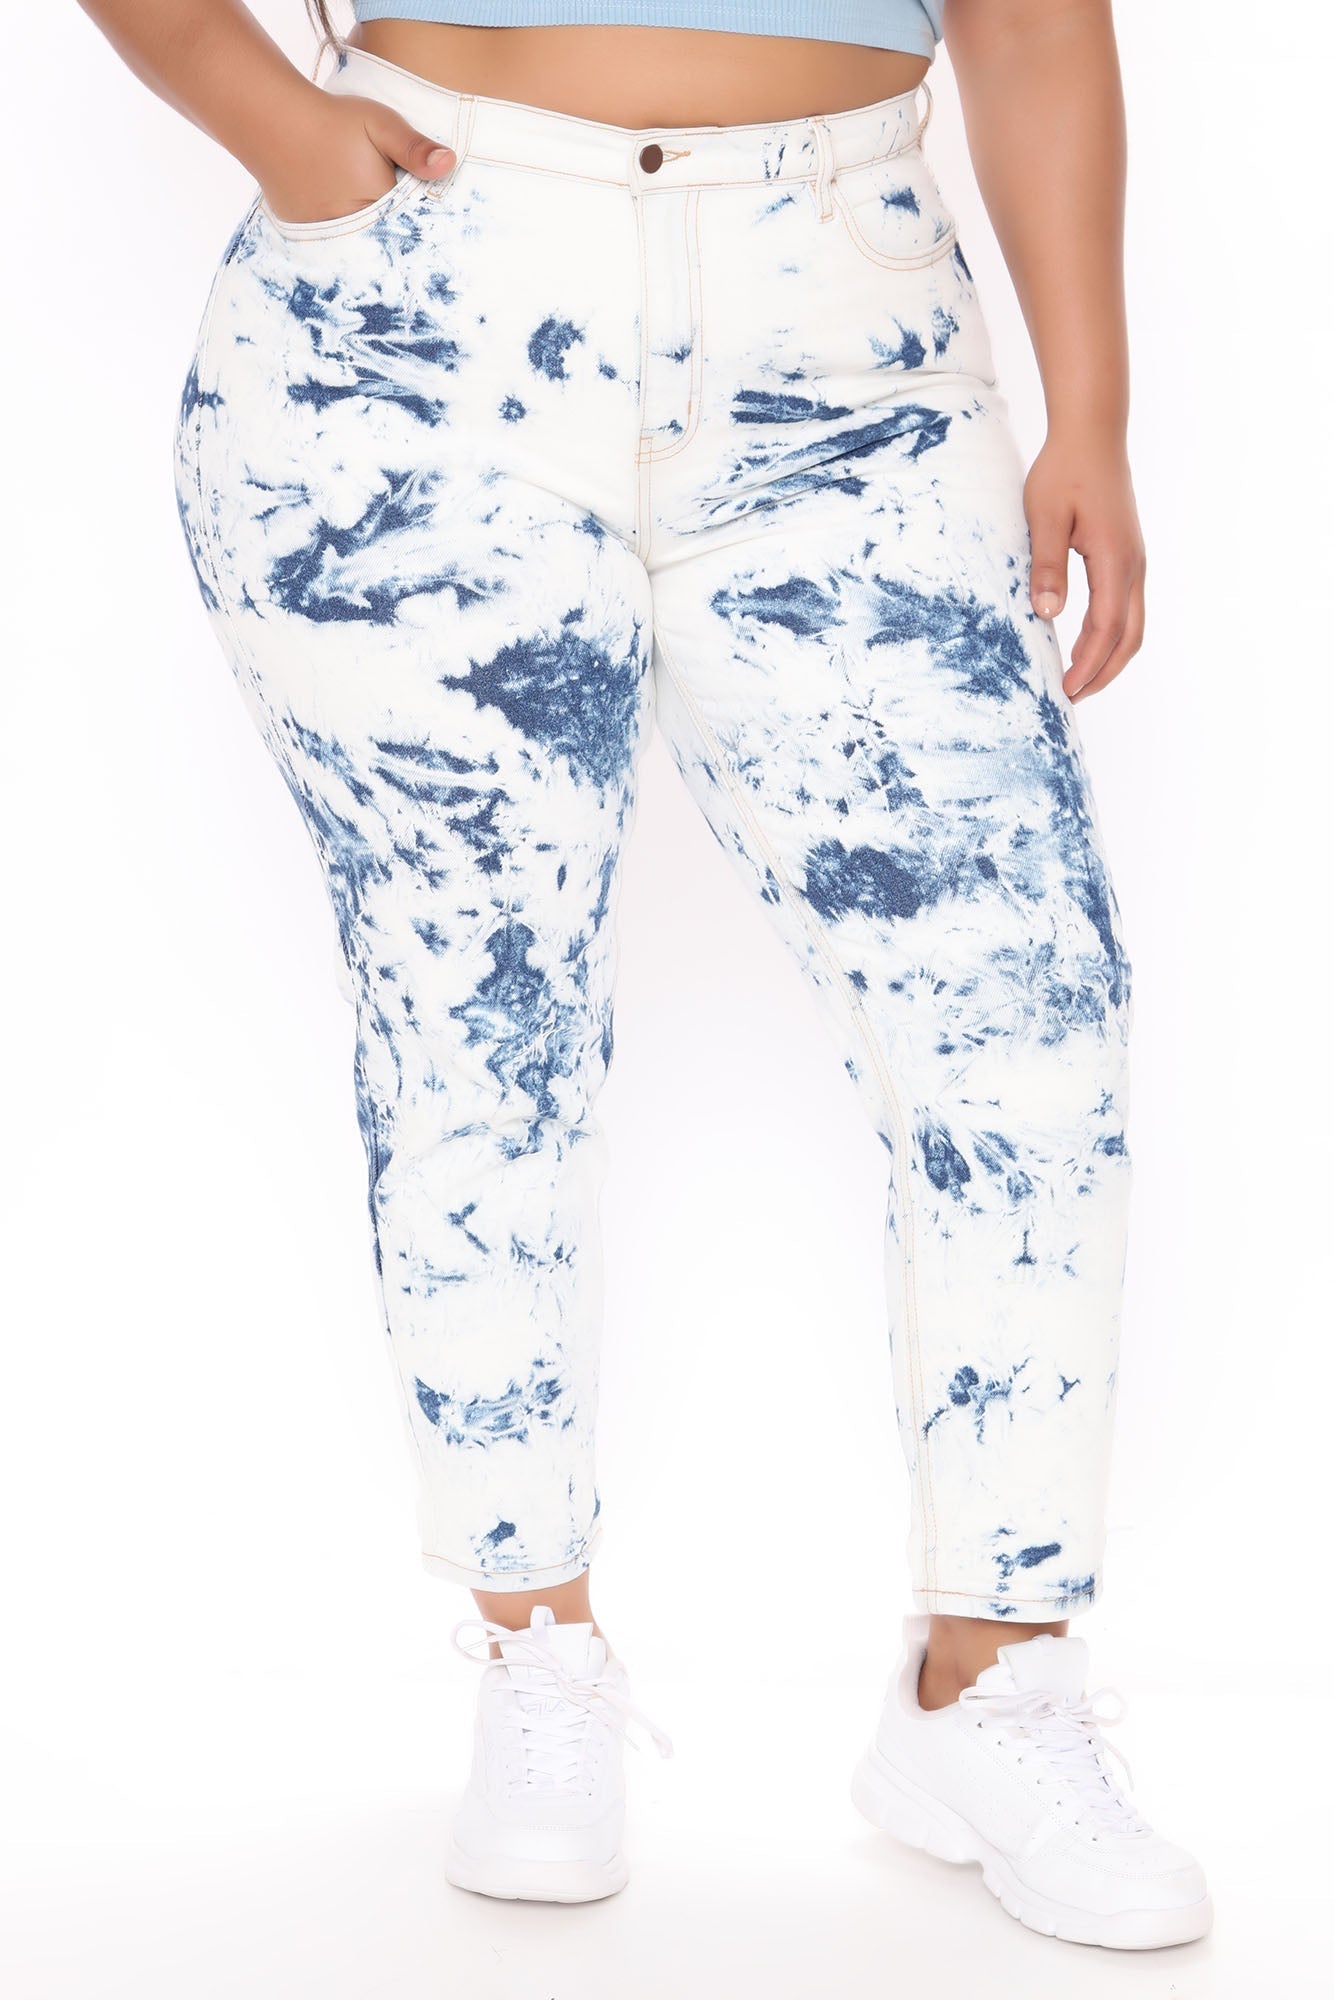 Cloudy Thoughts Tie Dye Mom Jeans - White/combo